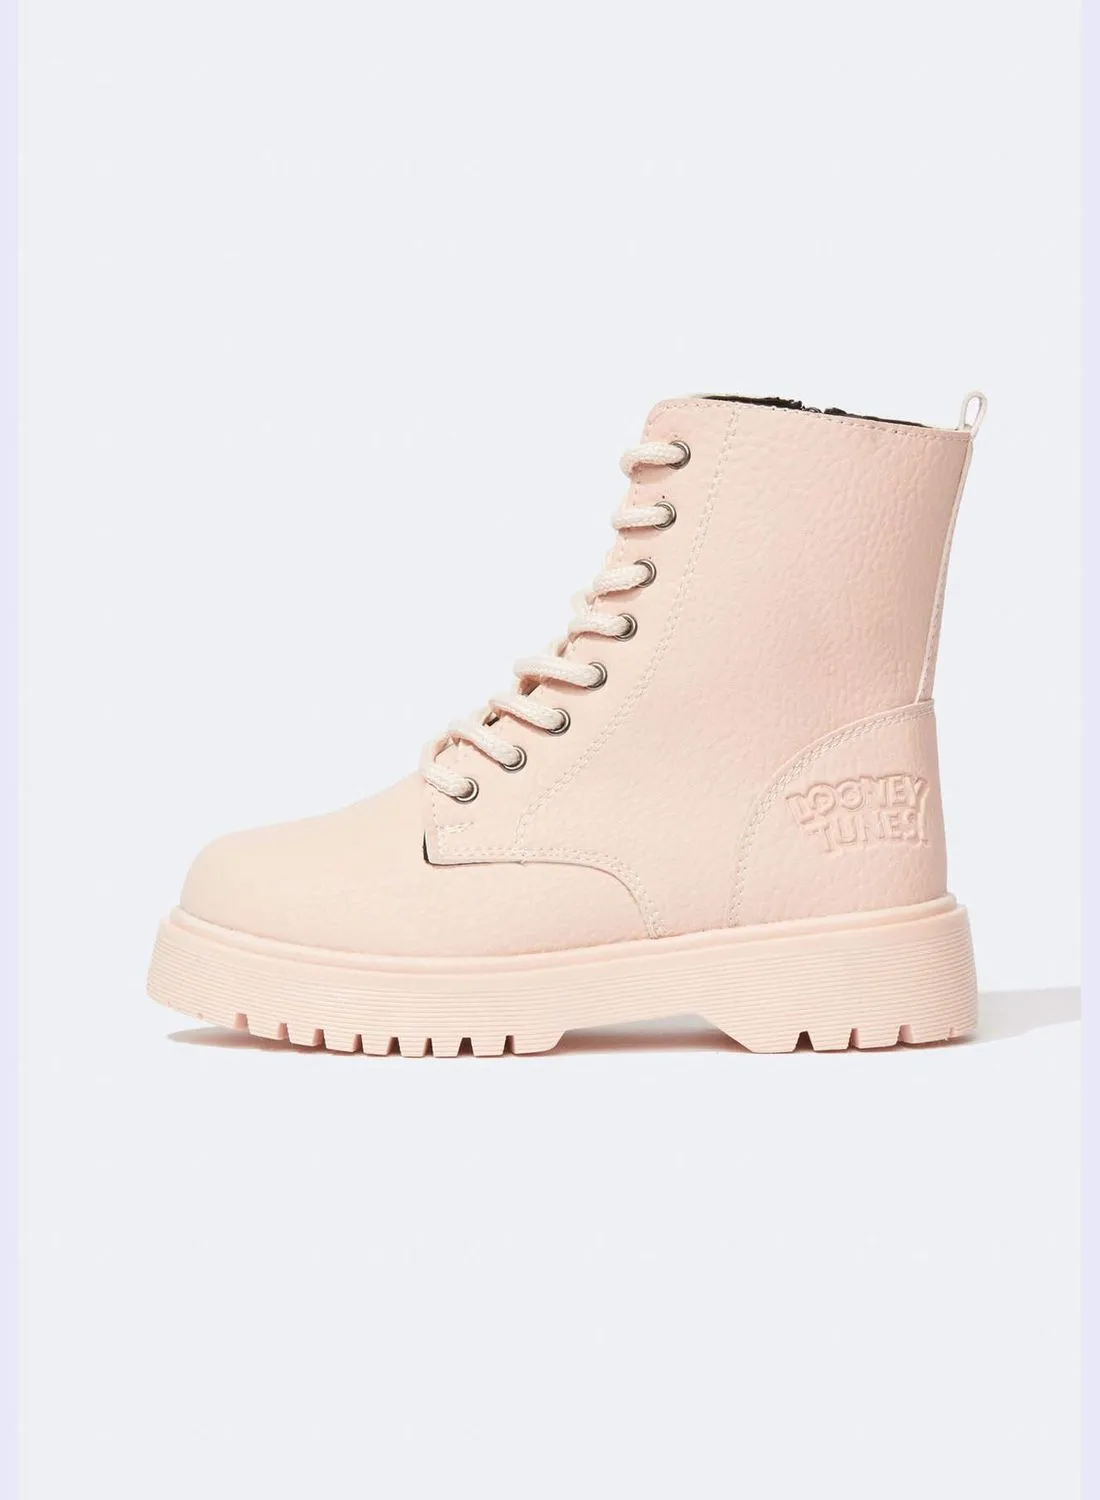 DeFacto Girl Looney Tunes Licenced Boots